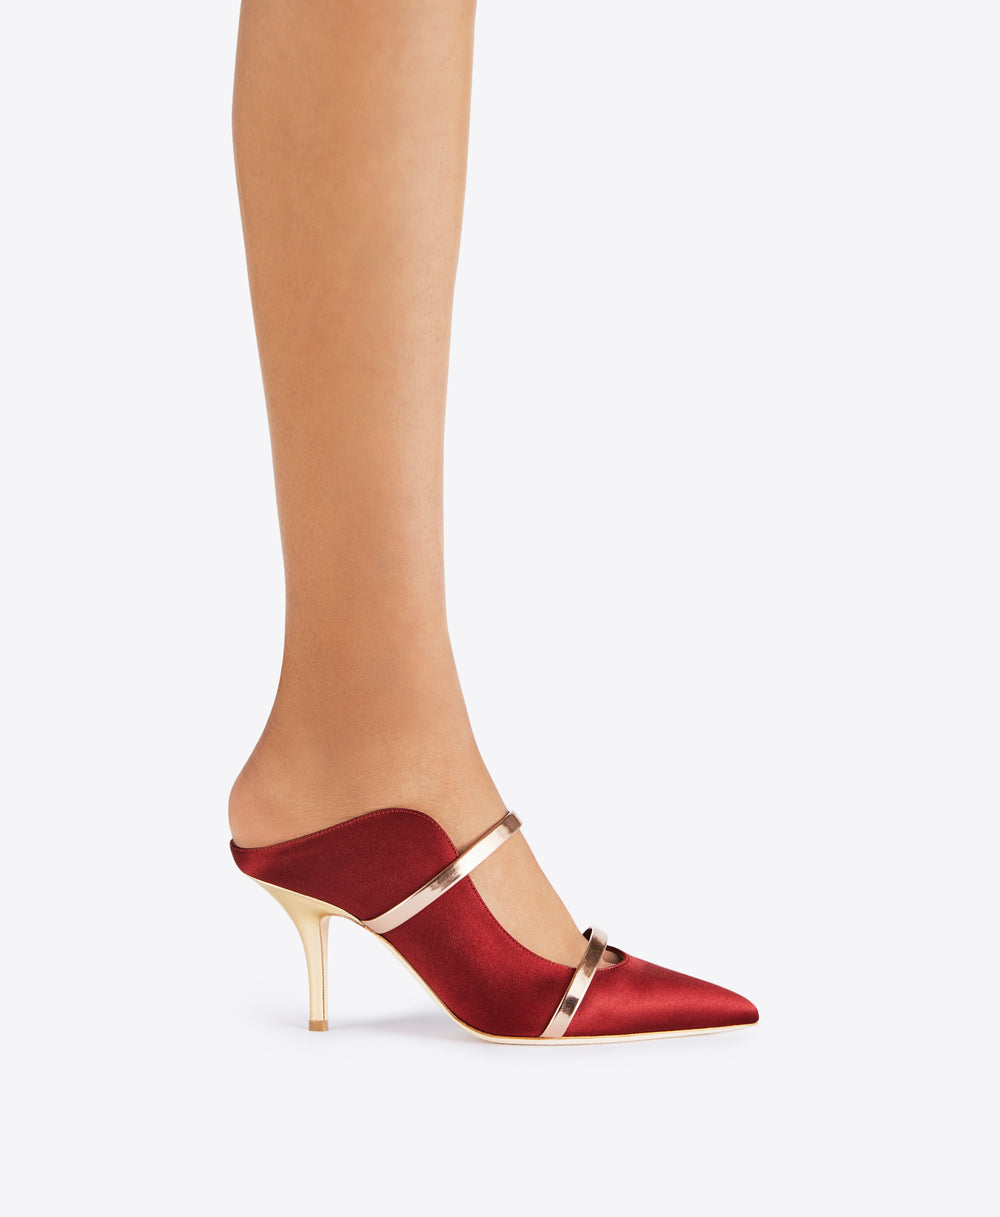 Women's Red Satin Pointed Toe Heeled Mules with Rose Gold Leather Straps Malone Souliers